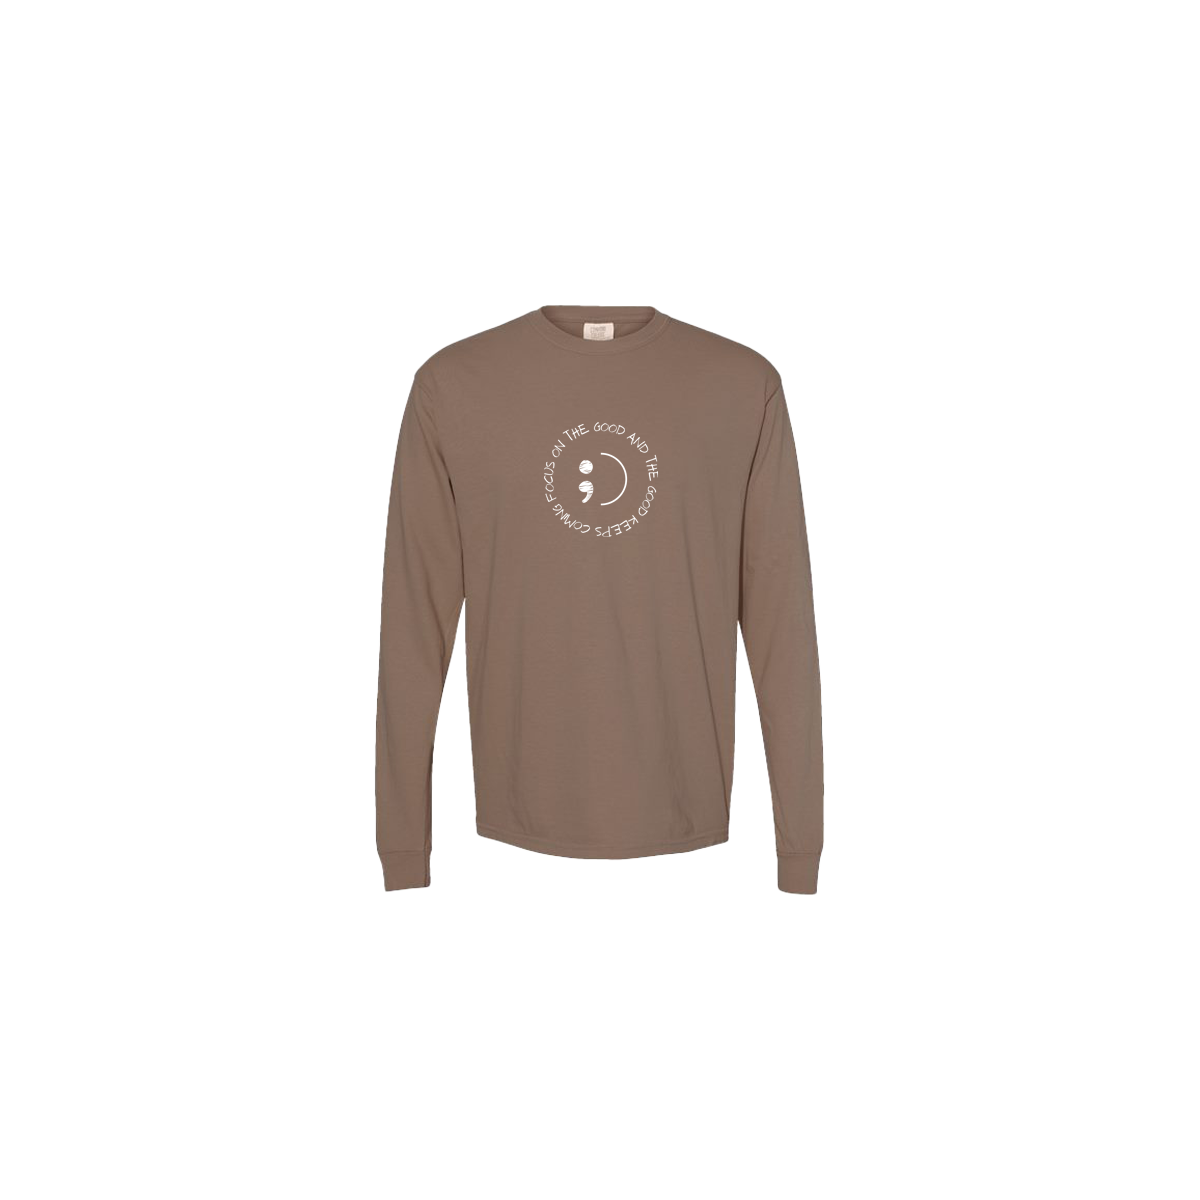 Focus on The Good And The Good Keeps Coming Embroidered Brown Long Sleeve Tshirt - Mental Health Awareness Clothing